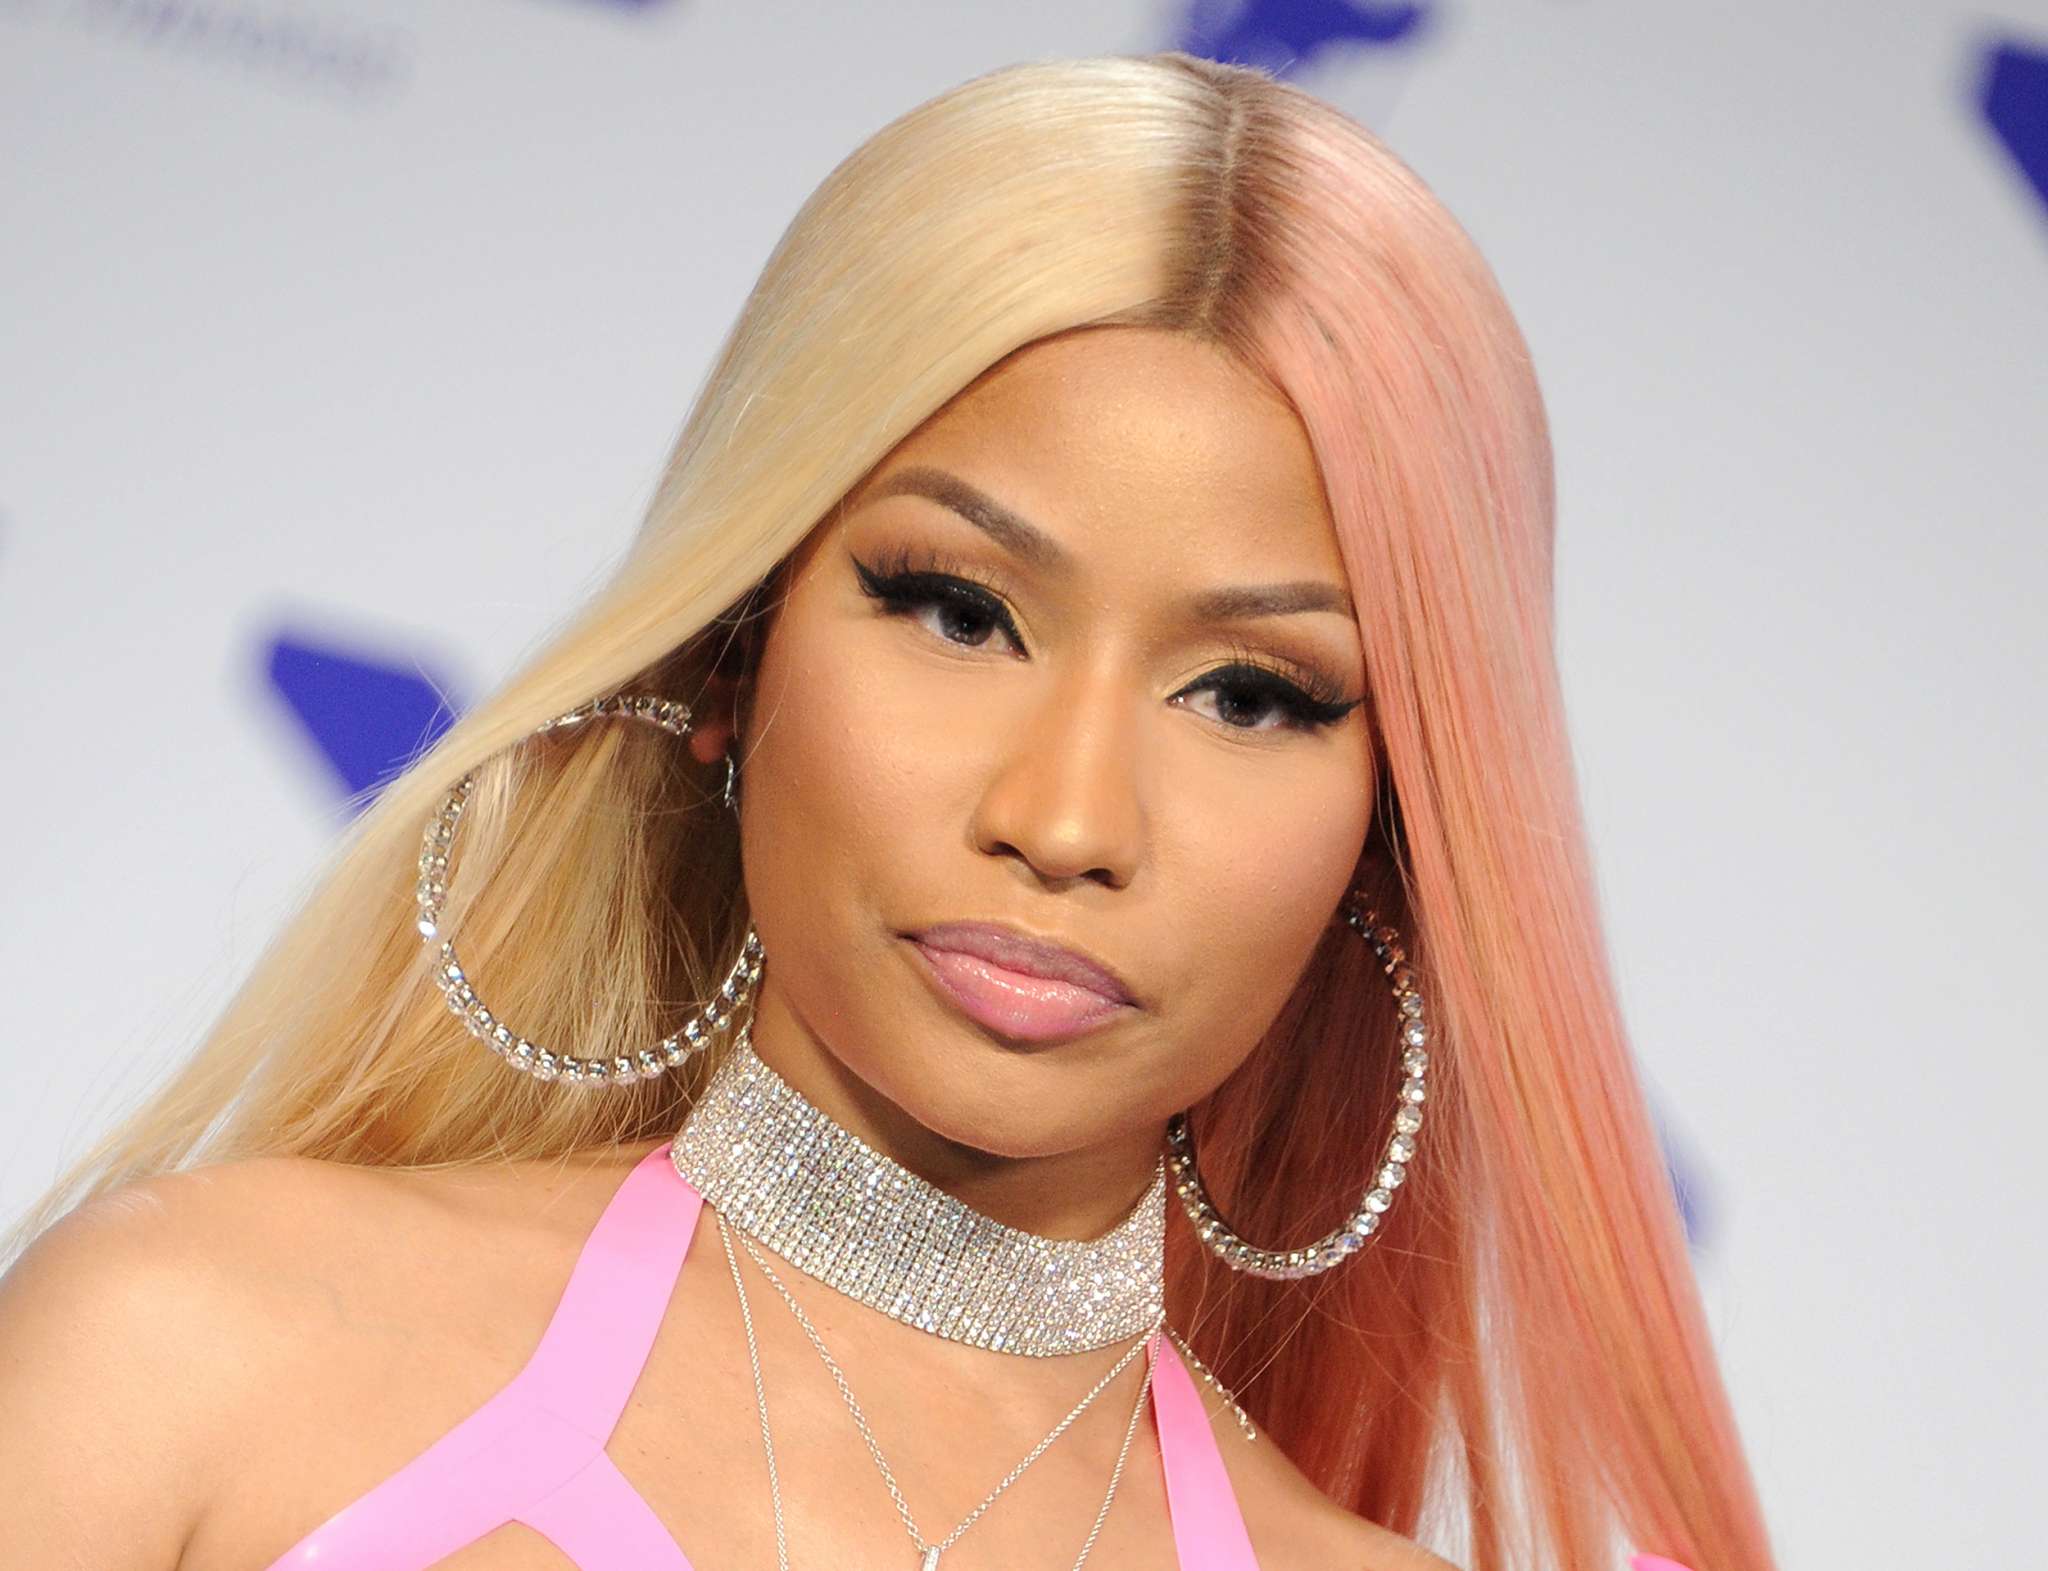 ”nicki-minaj-is-grateful-for-a-decade-of-support”